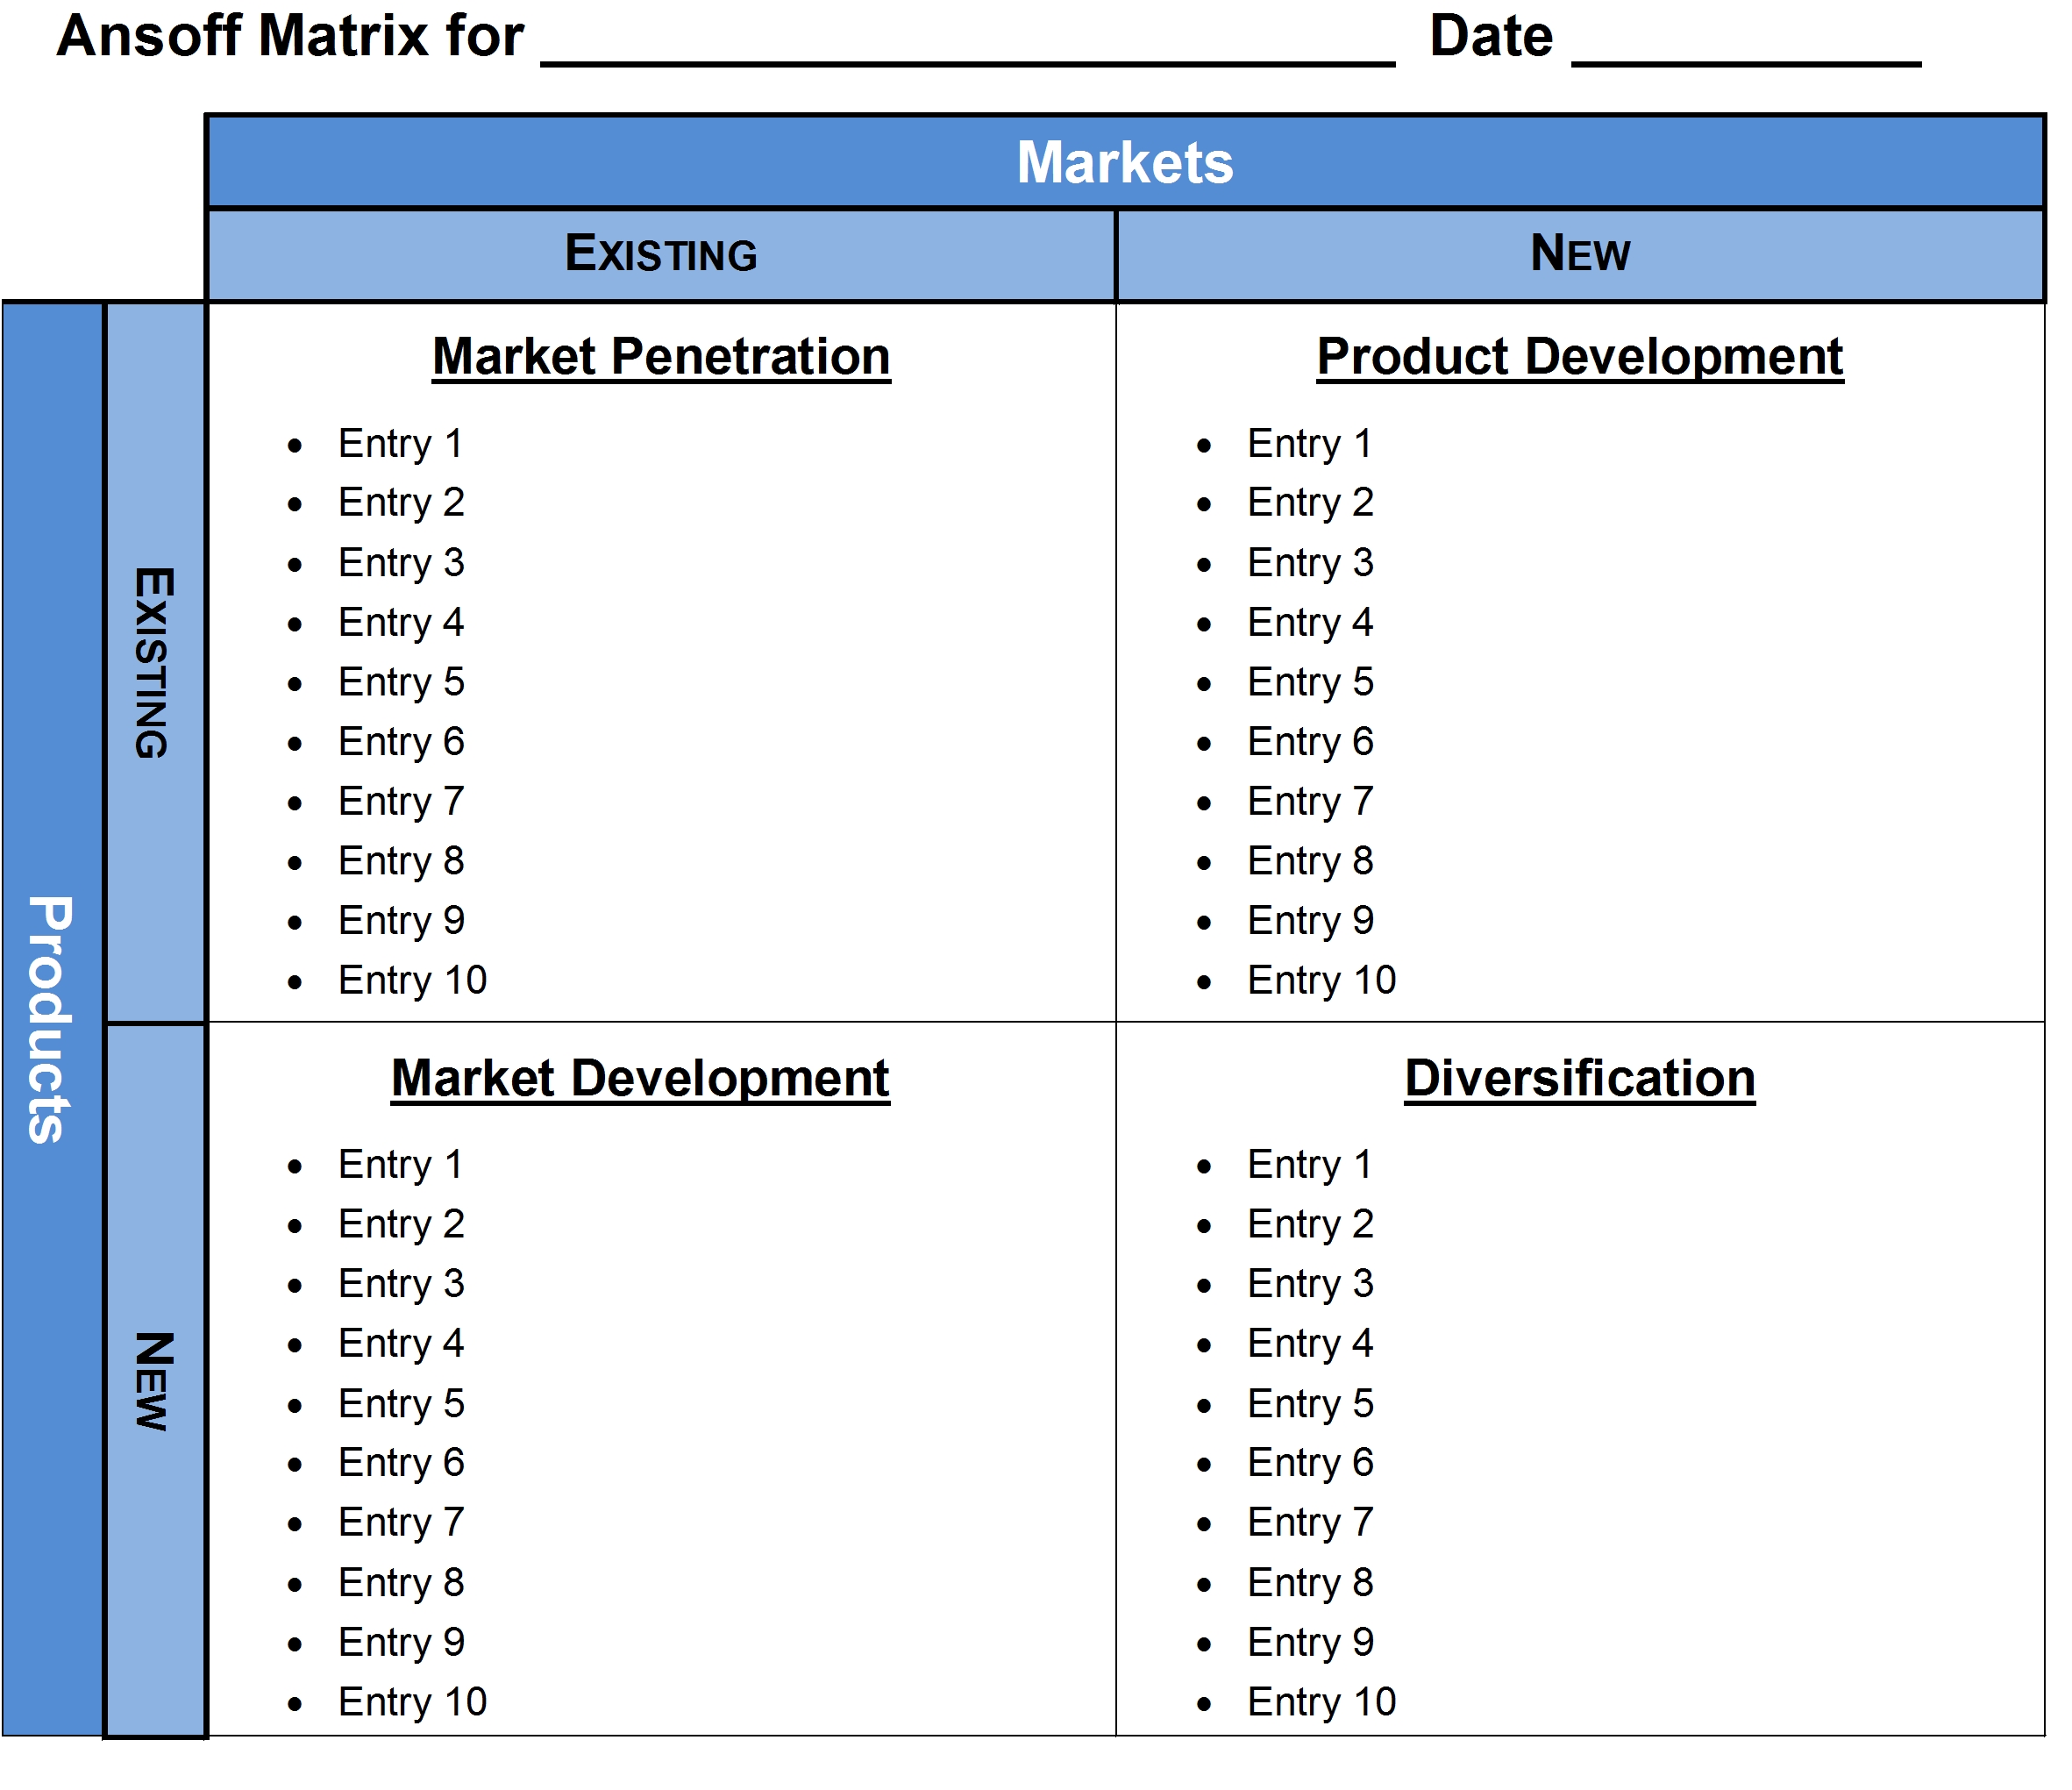 ansoff-product-market-matrix-template-for-word-added-to-the-business